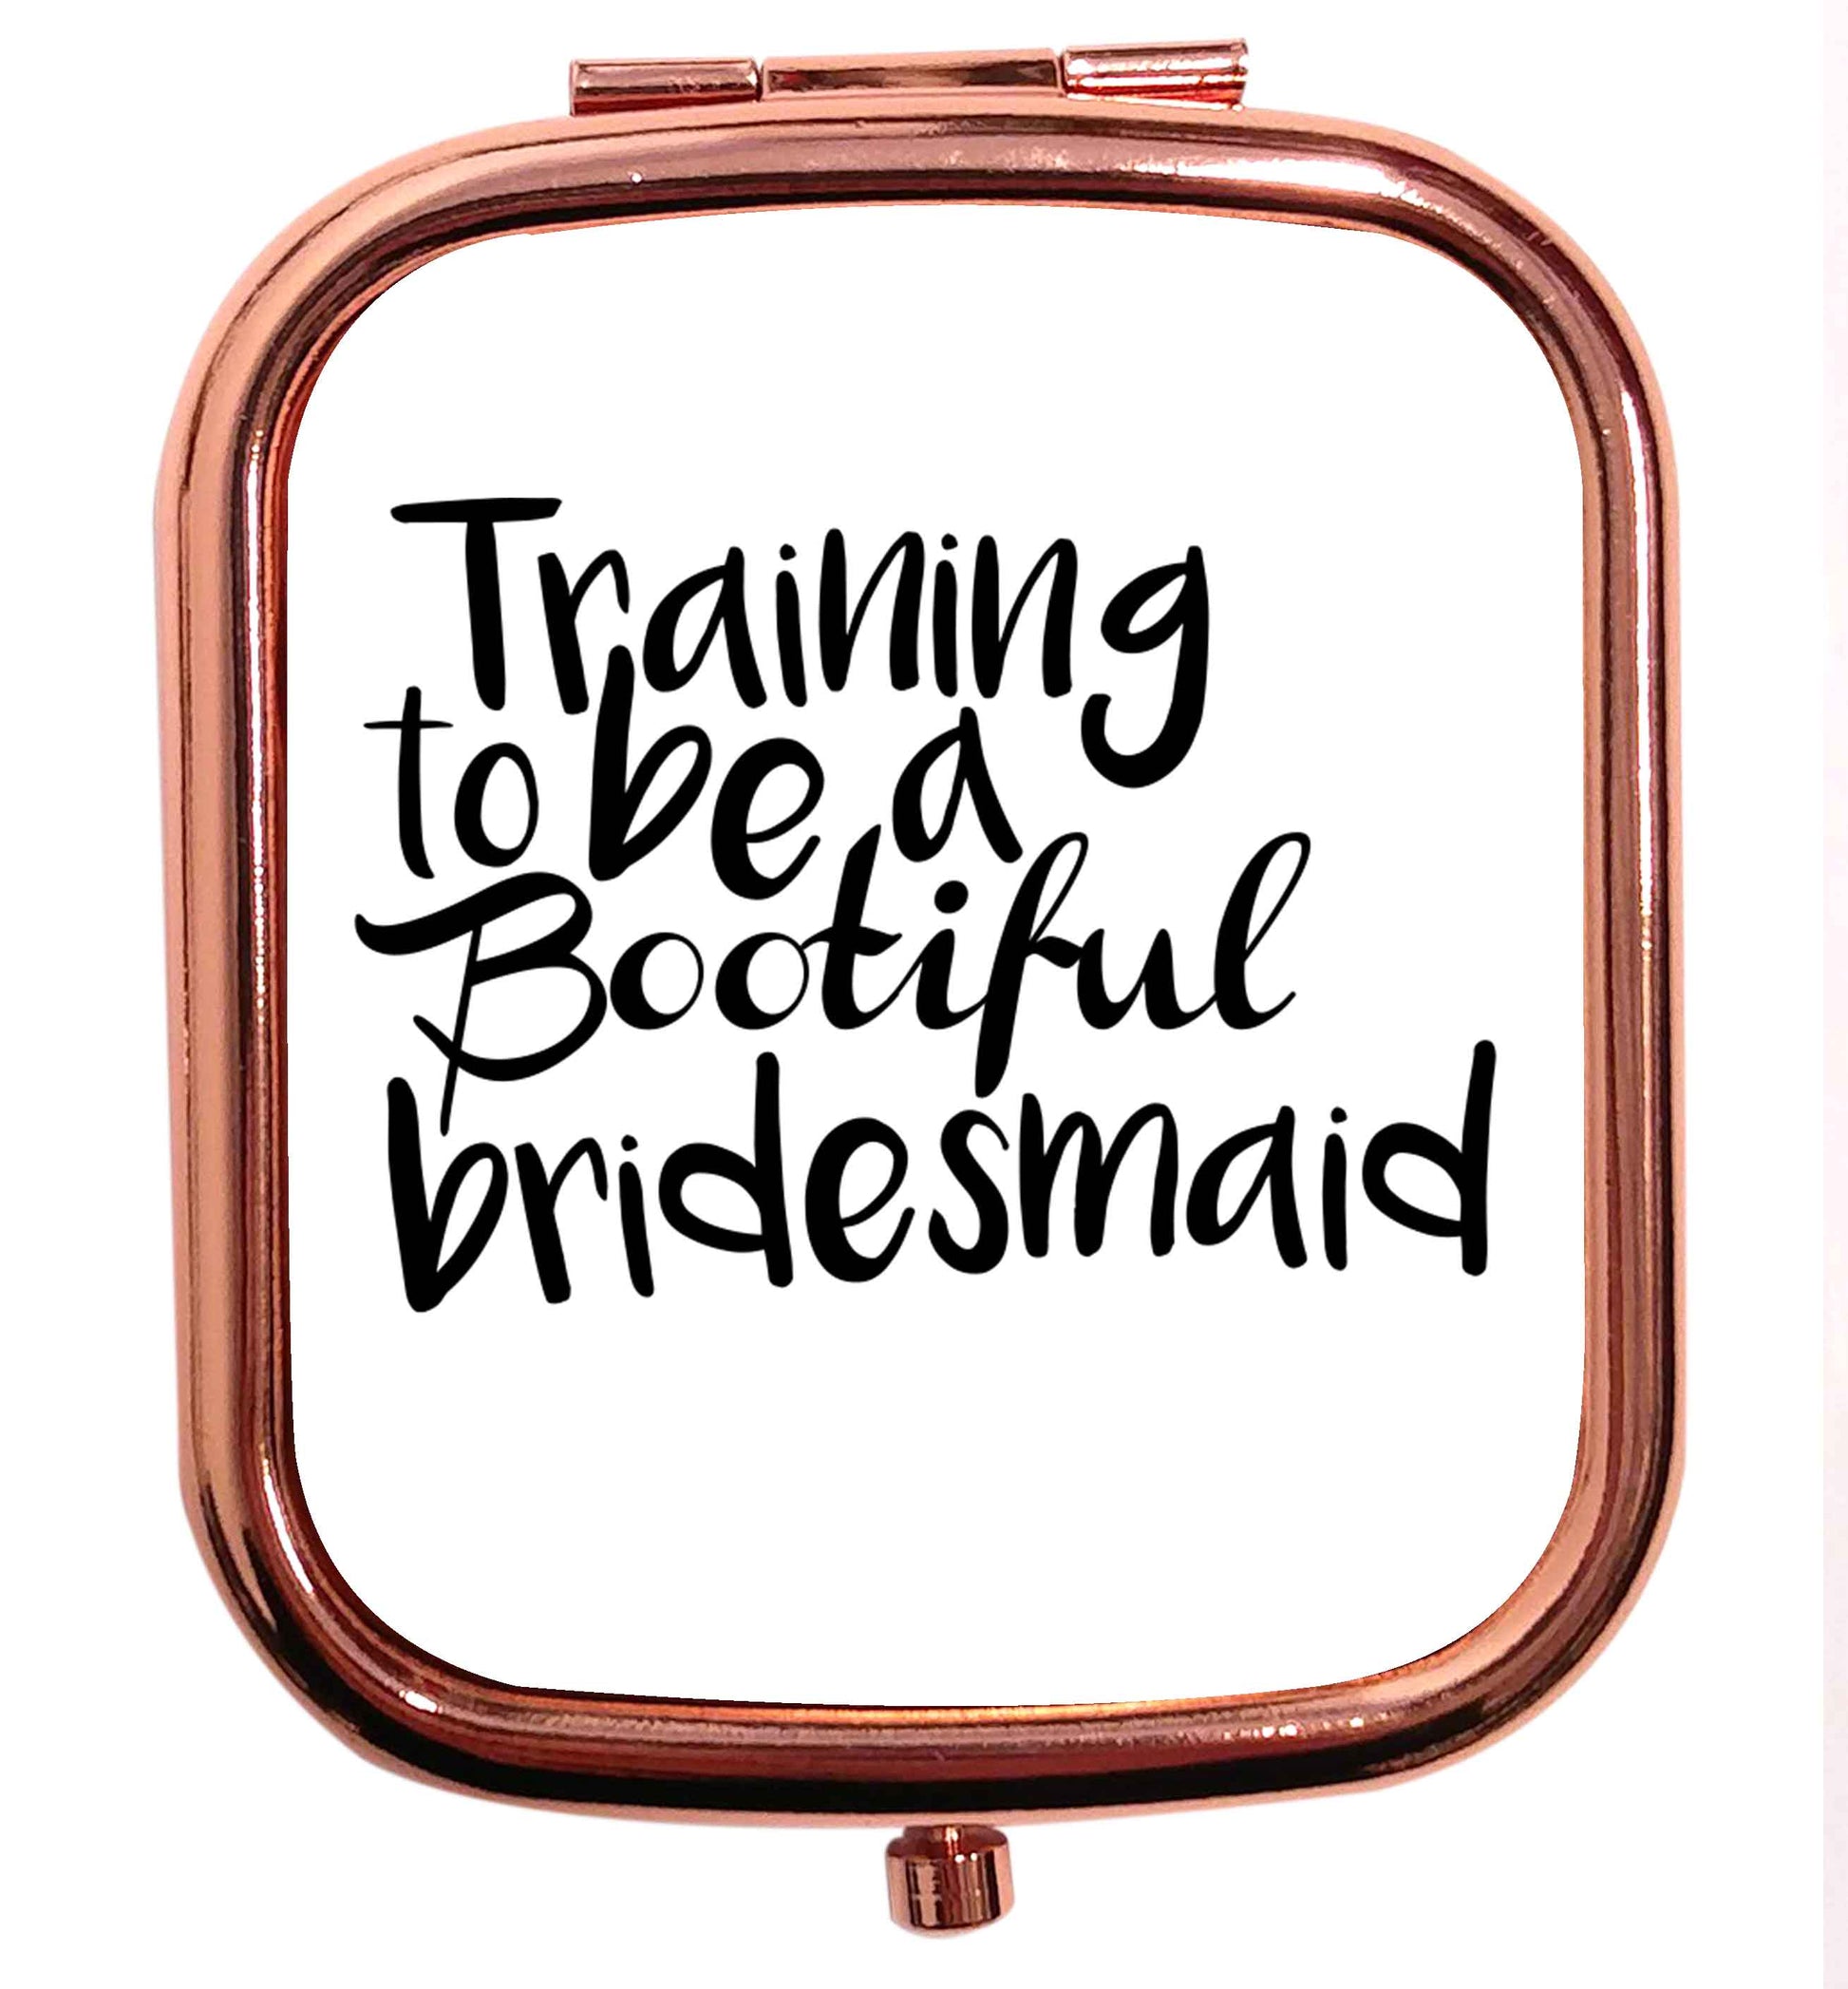 Get motivated and get fit for your big day! Our workout quotes and designs will get you ready to sweat! Perfect for any bride, groom or bridesmaid to be!  rose gold square pocket mirror